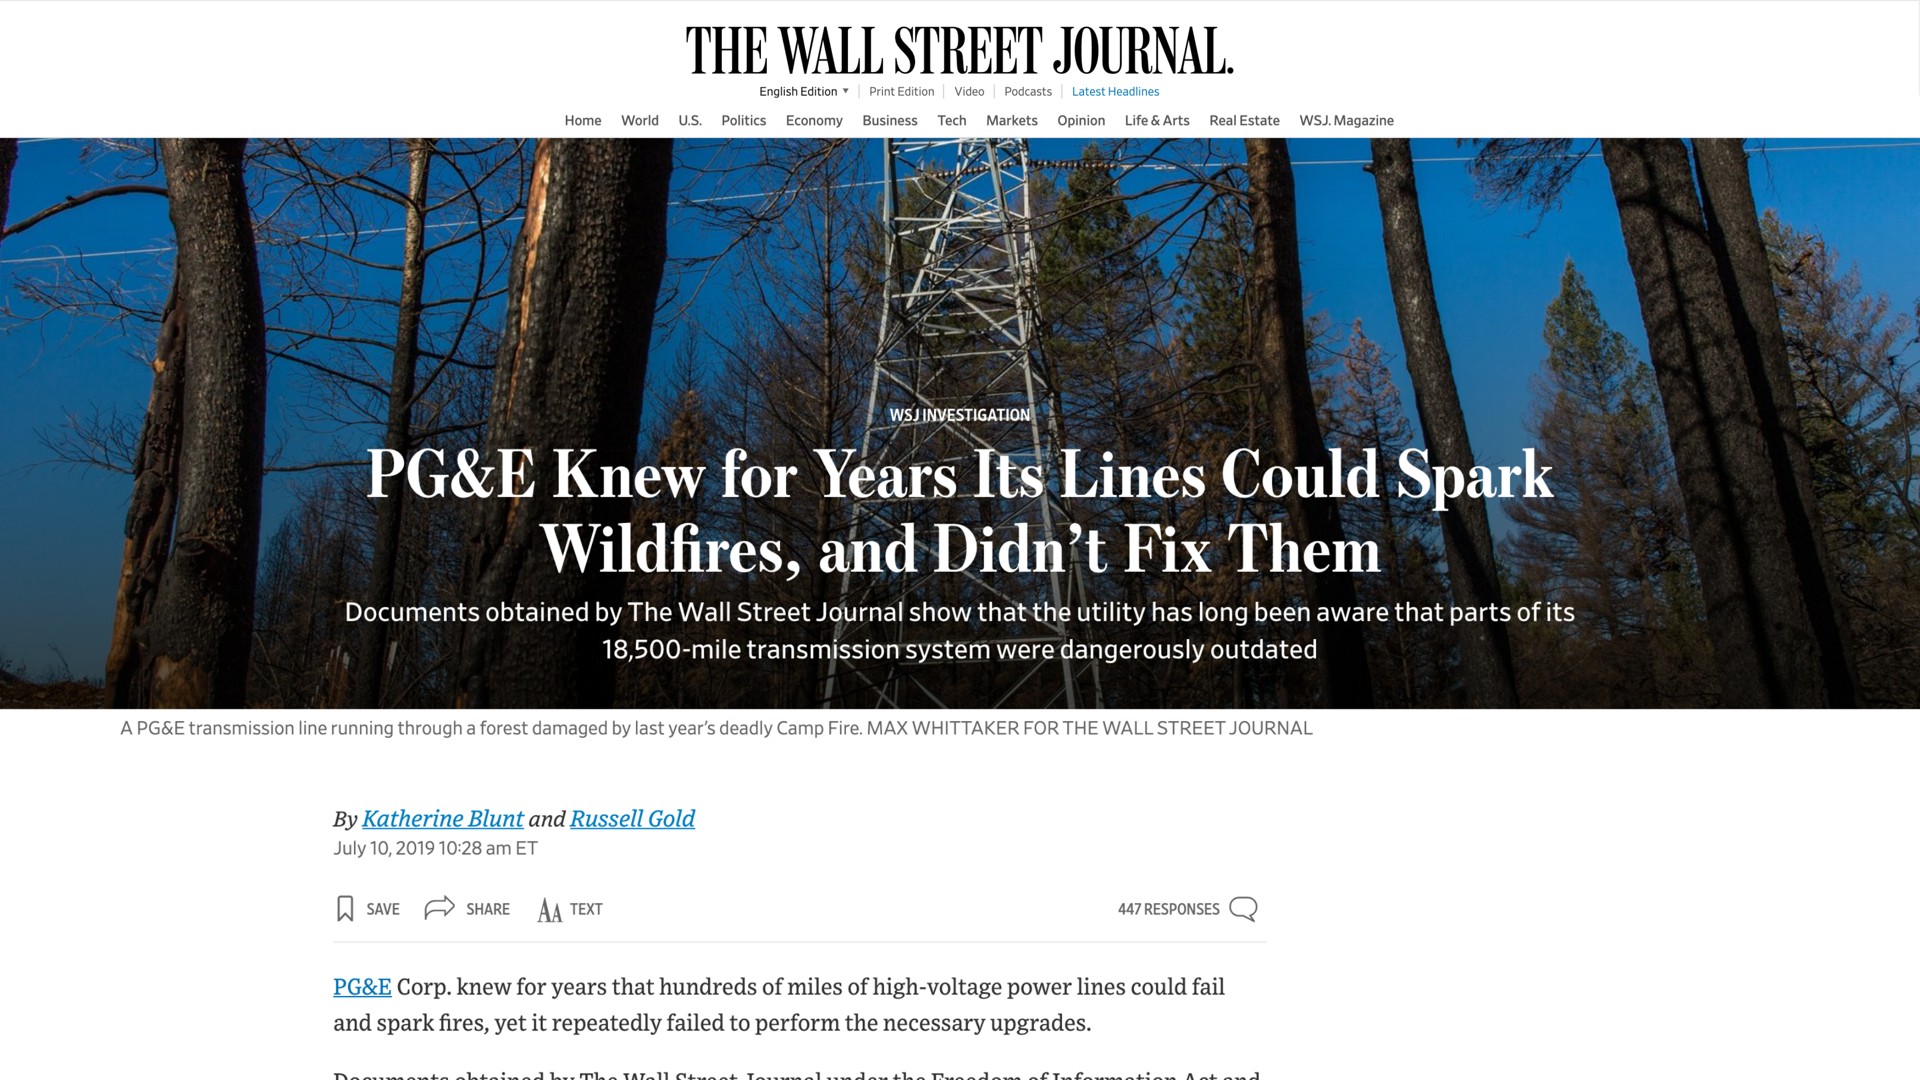 the wall street journal knew for years its lines could spark wildfires and fix them | Dow Jones